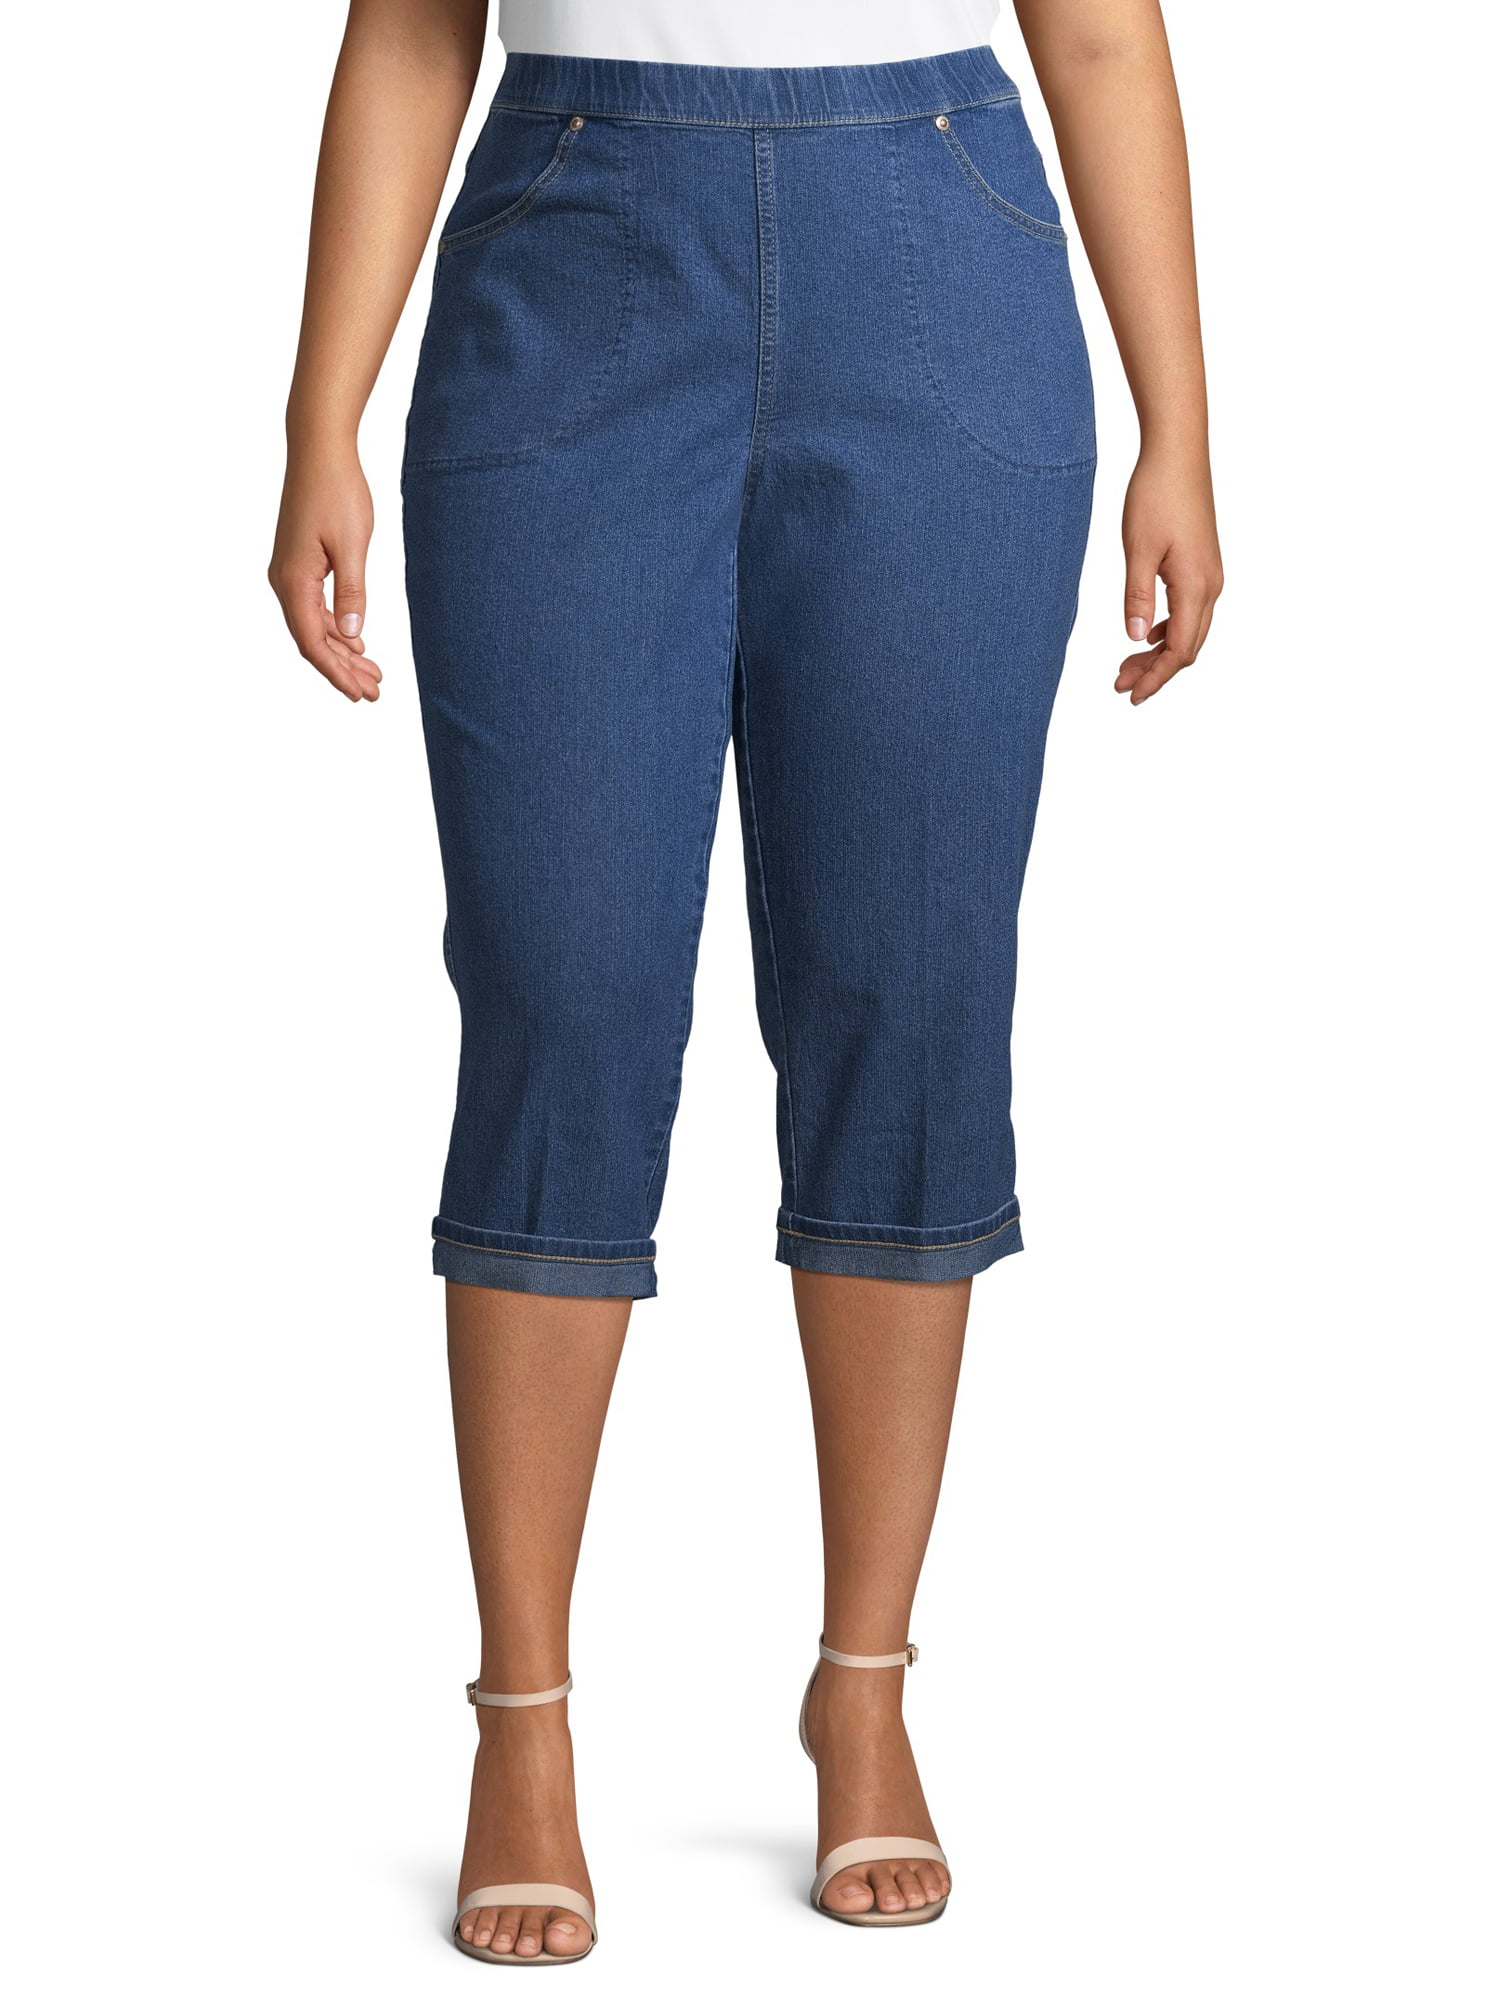 NWT  JUST MY SIZE 4X FRENCH TERRY JERSEY KNIT POCKET CAPRIS HEATHER BLUE 